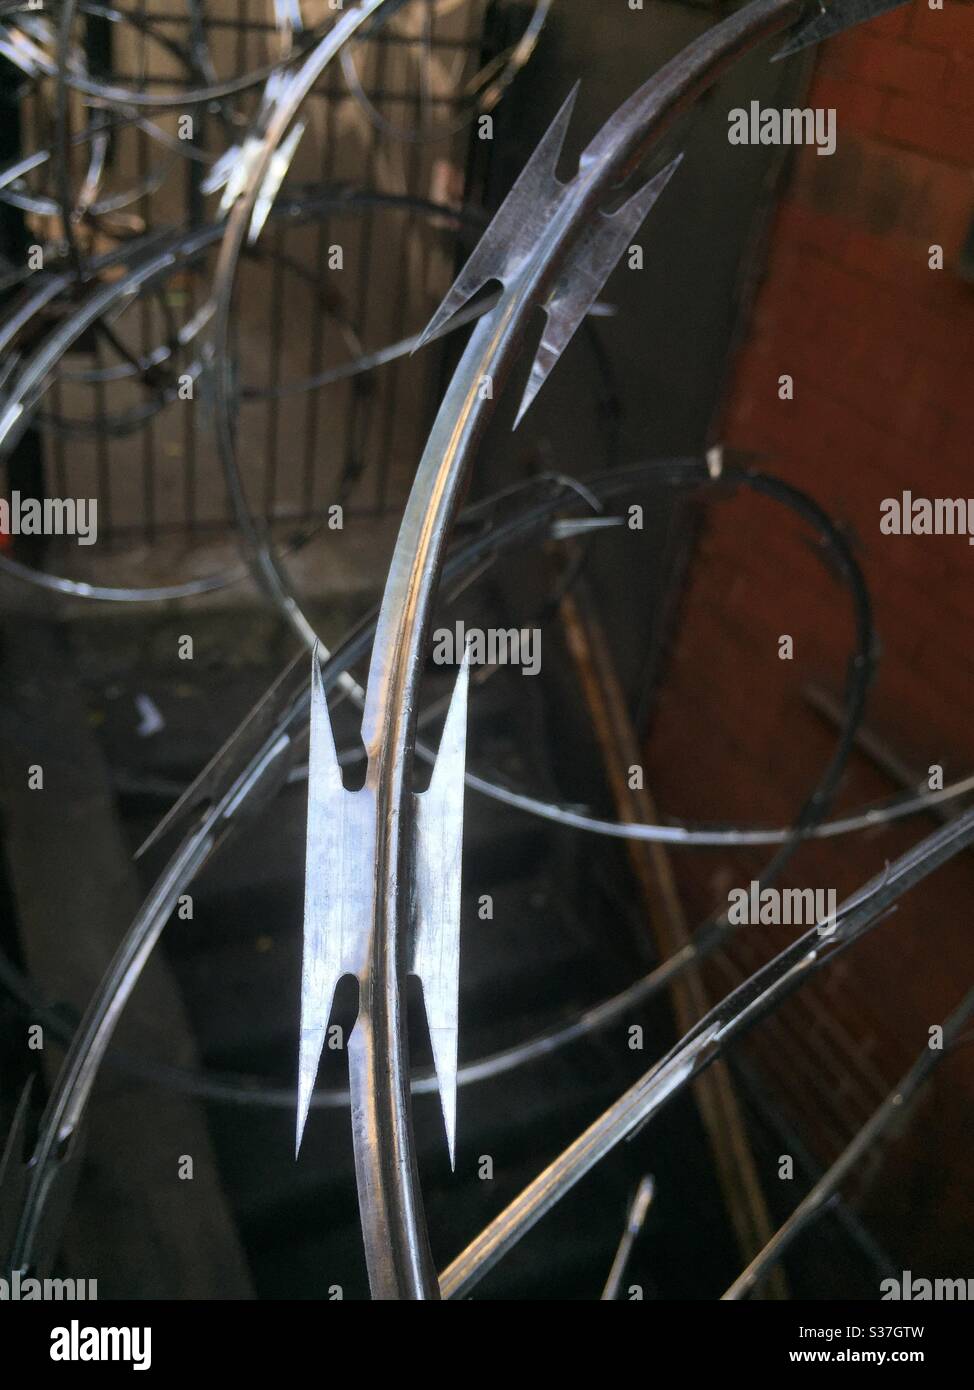 Close up of the blades on a coil of concertina wire placed in front of a midtown building as a result of earlier looting during the coronavirus pandemic, June 2020, NYC, USA Stock Photo